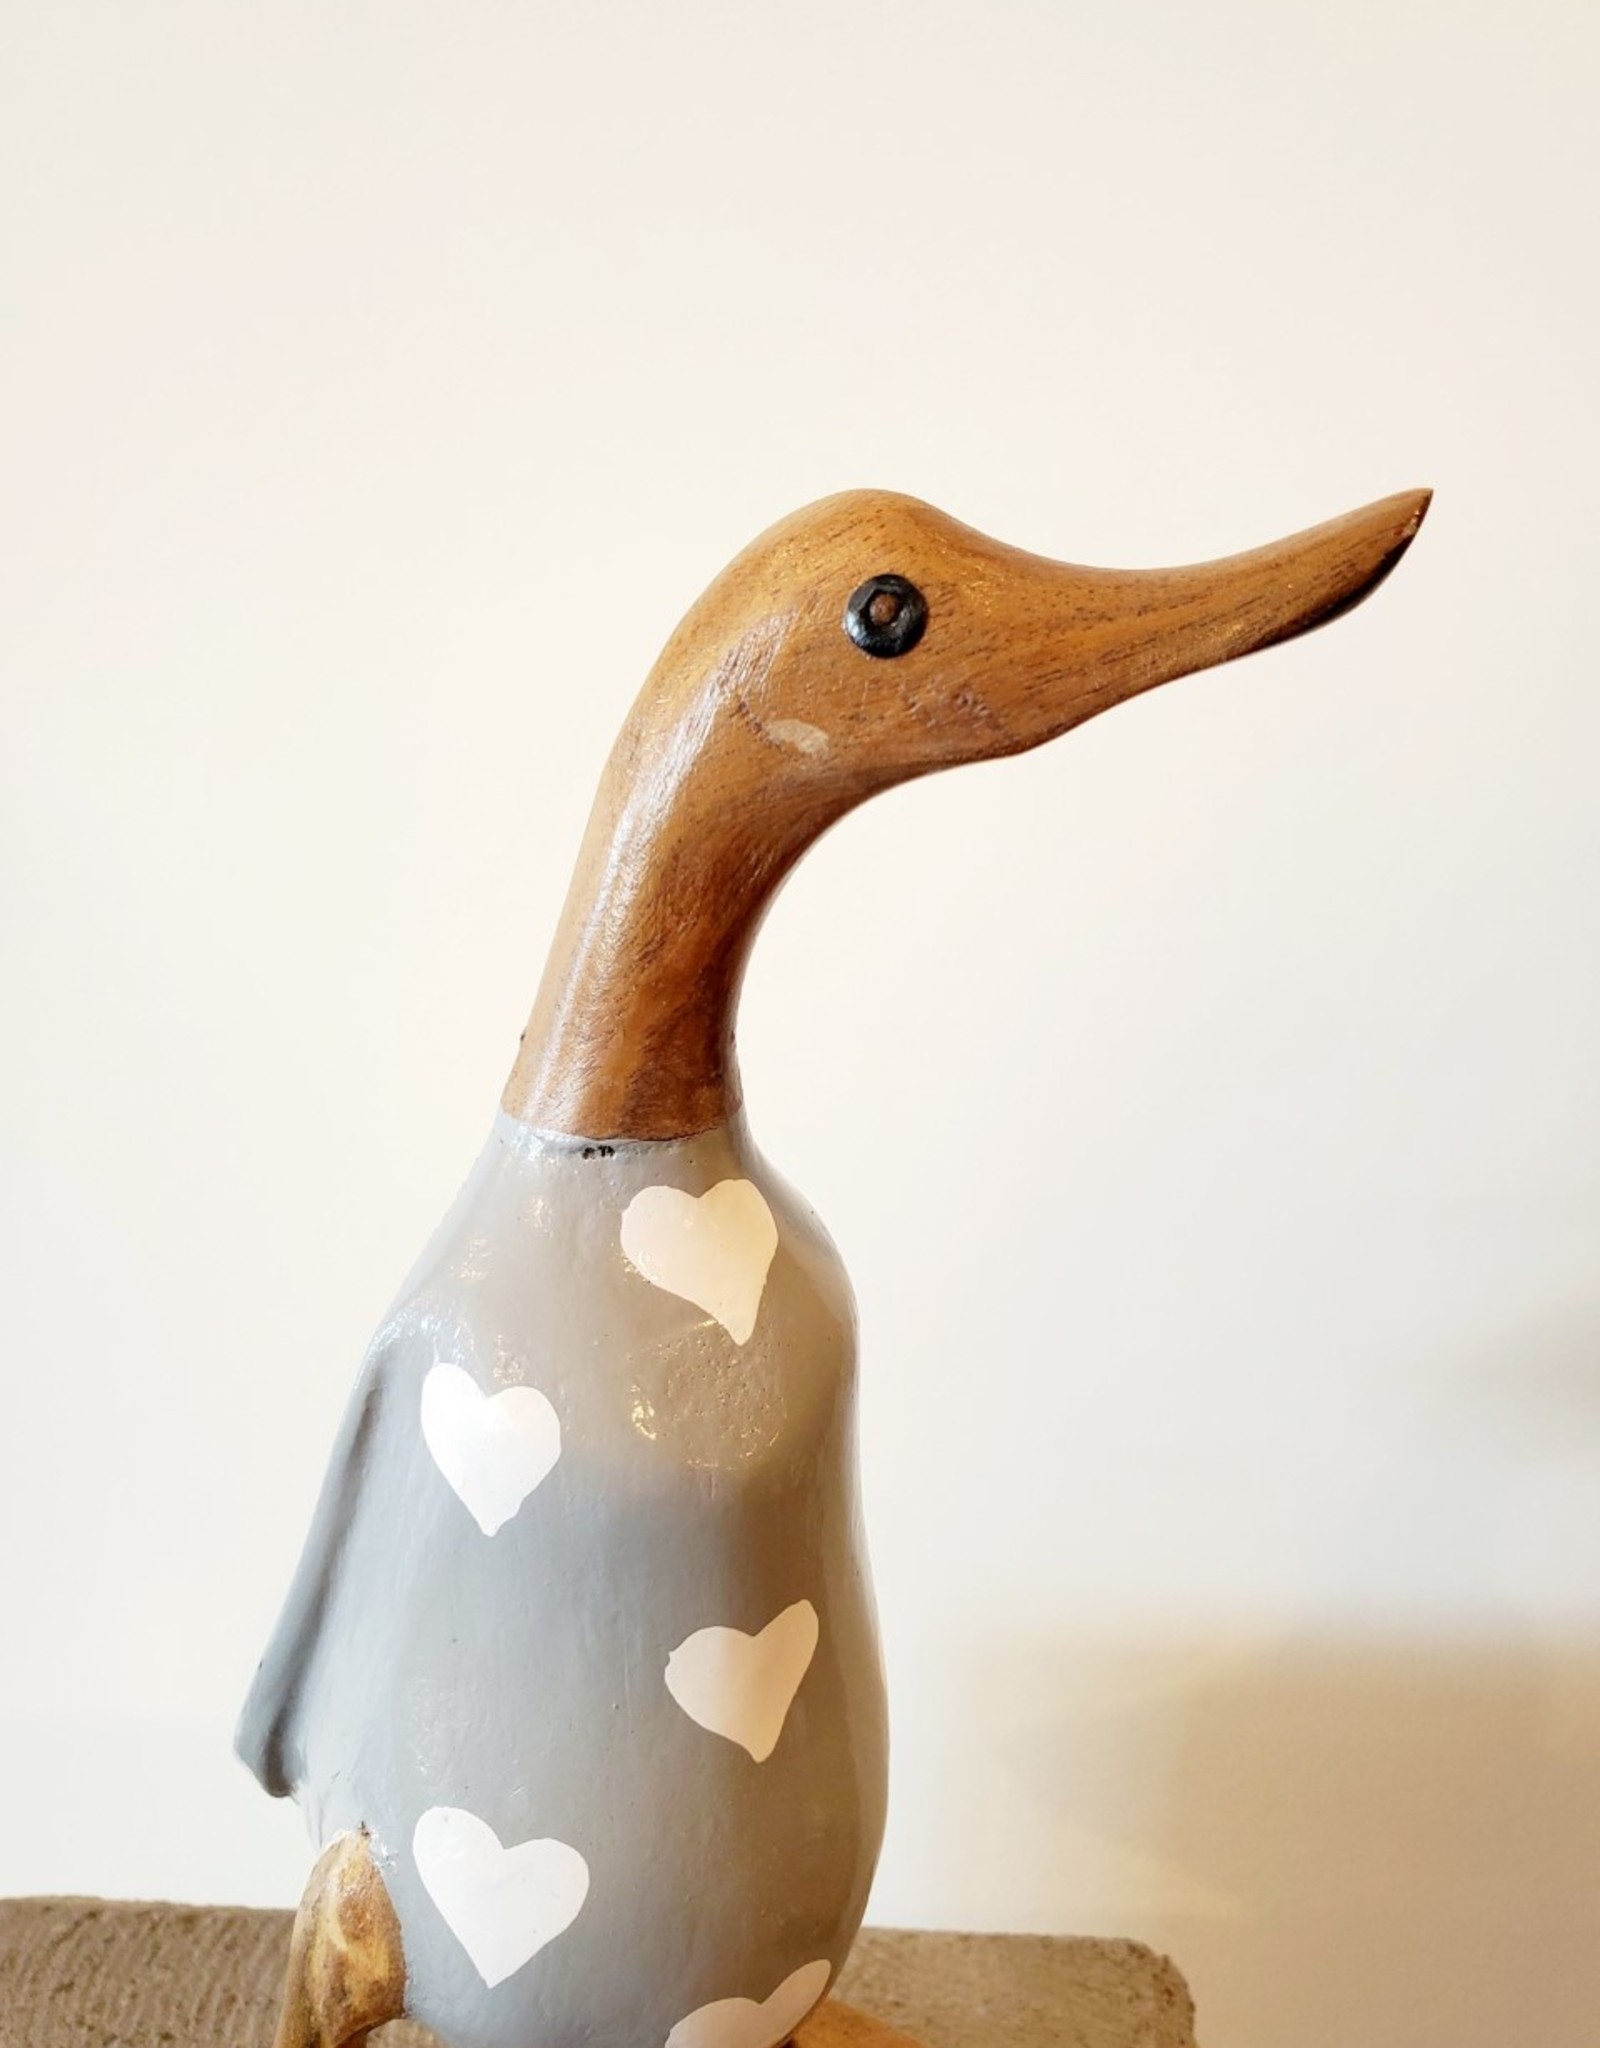 Bamboo Root Grey Duck with Hearts